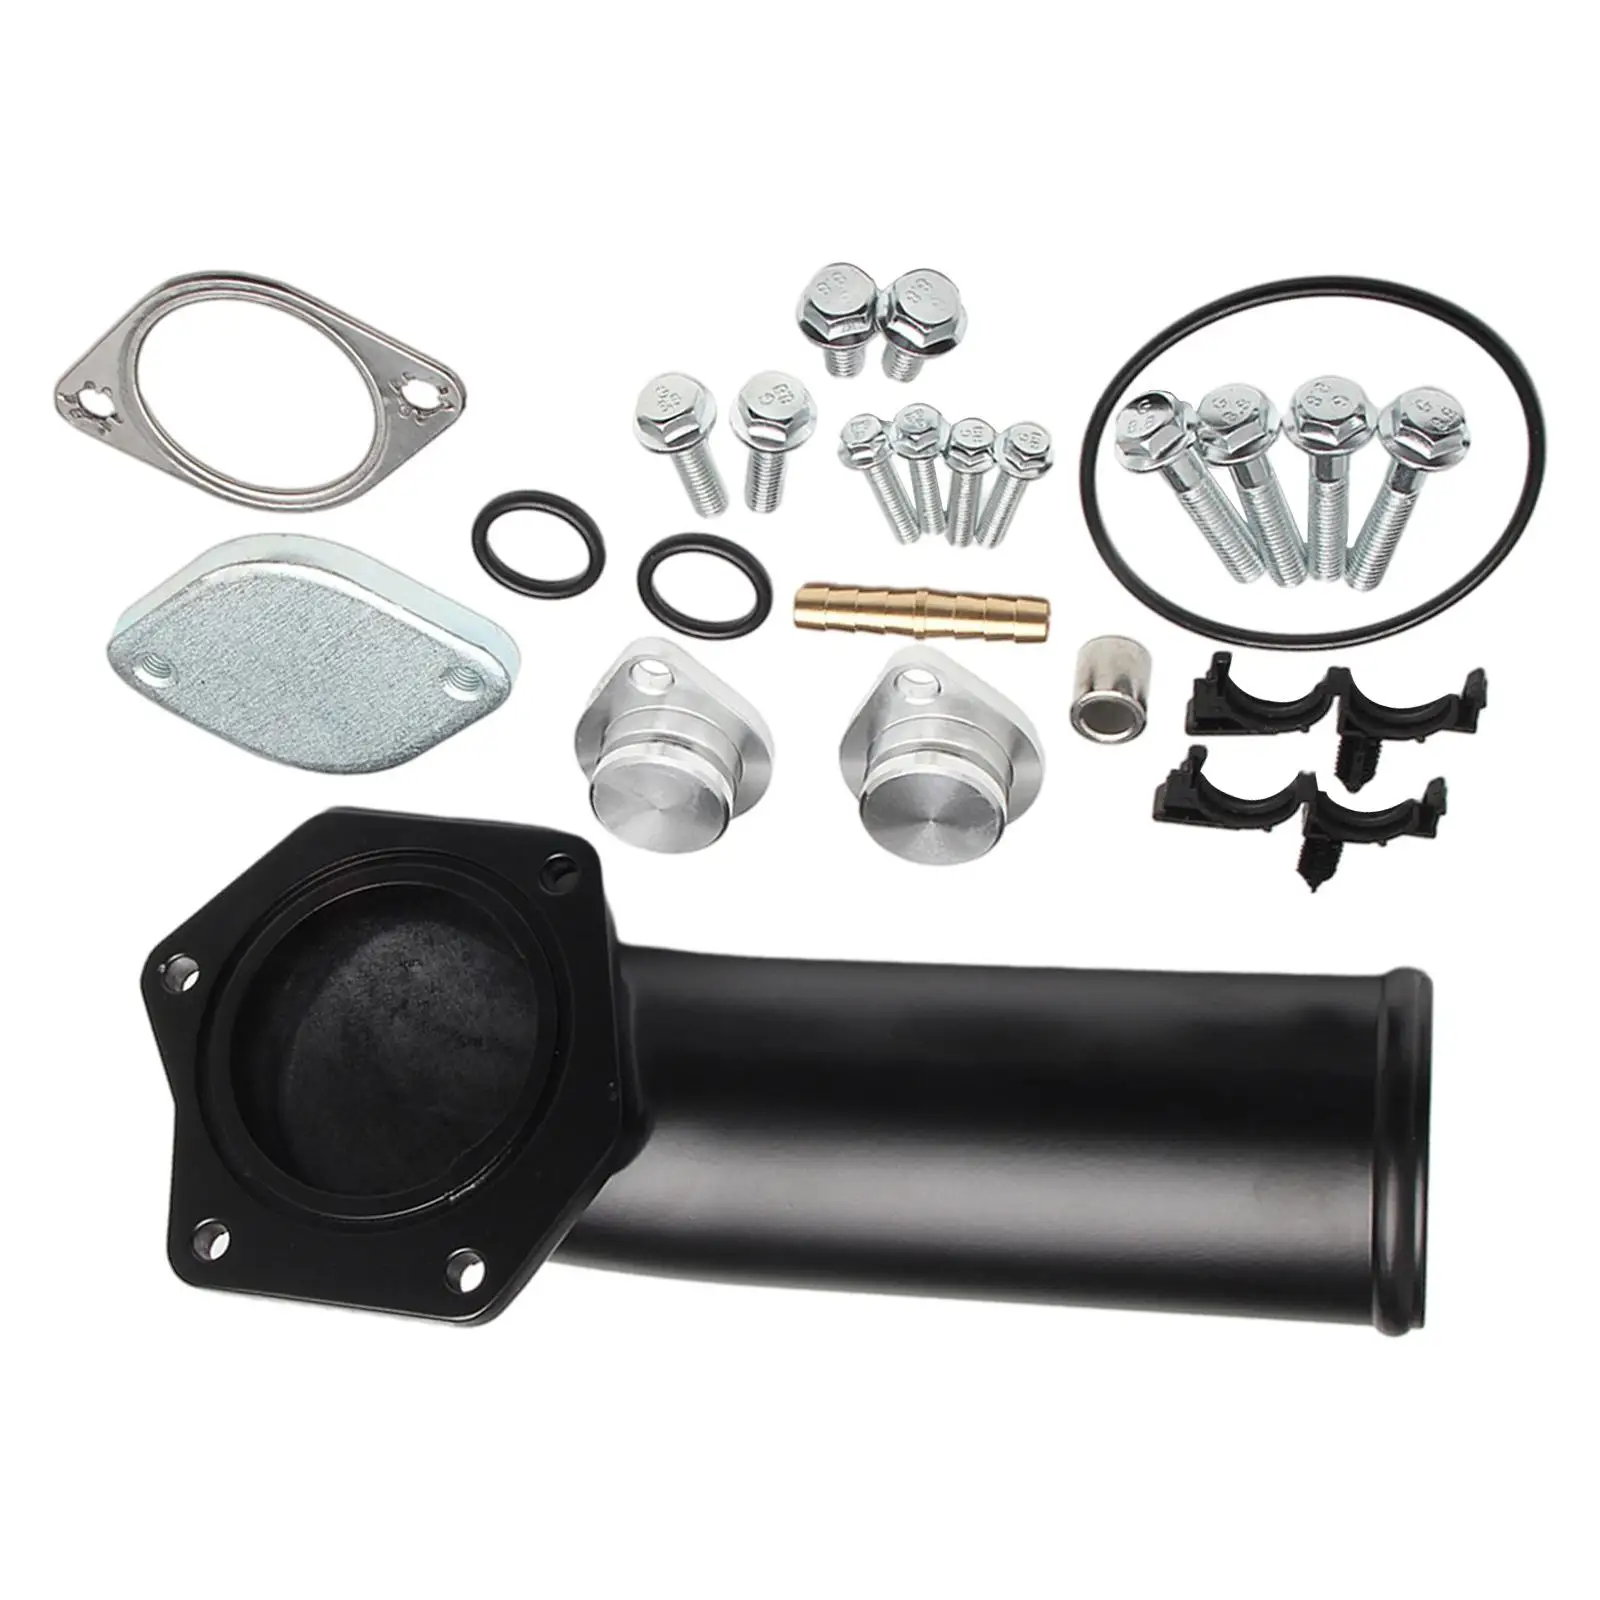 Intake Elbow Pipe Repalcement 6.4L High Flow Black Powerstroke 391Ci Parts 2008-2010 Kit for Ford Super Duty